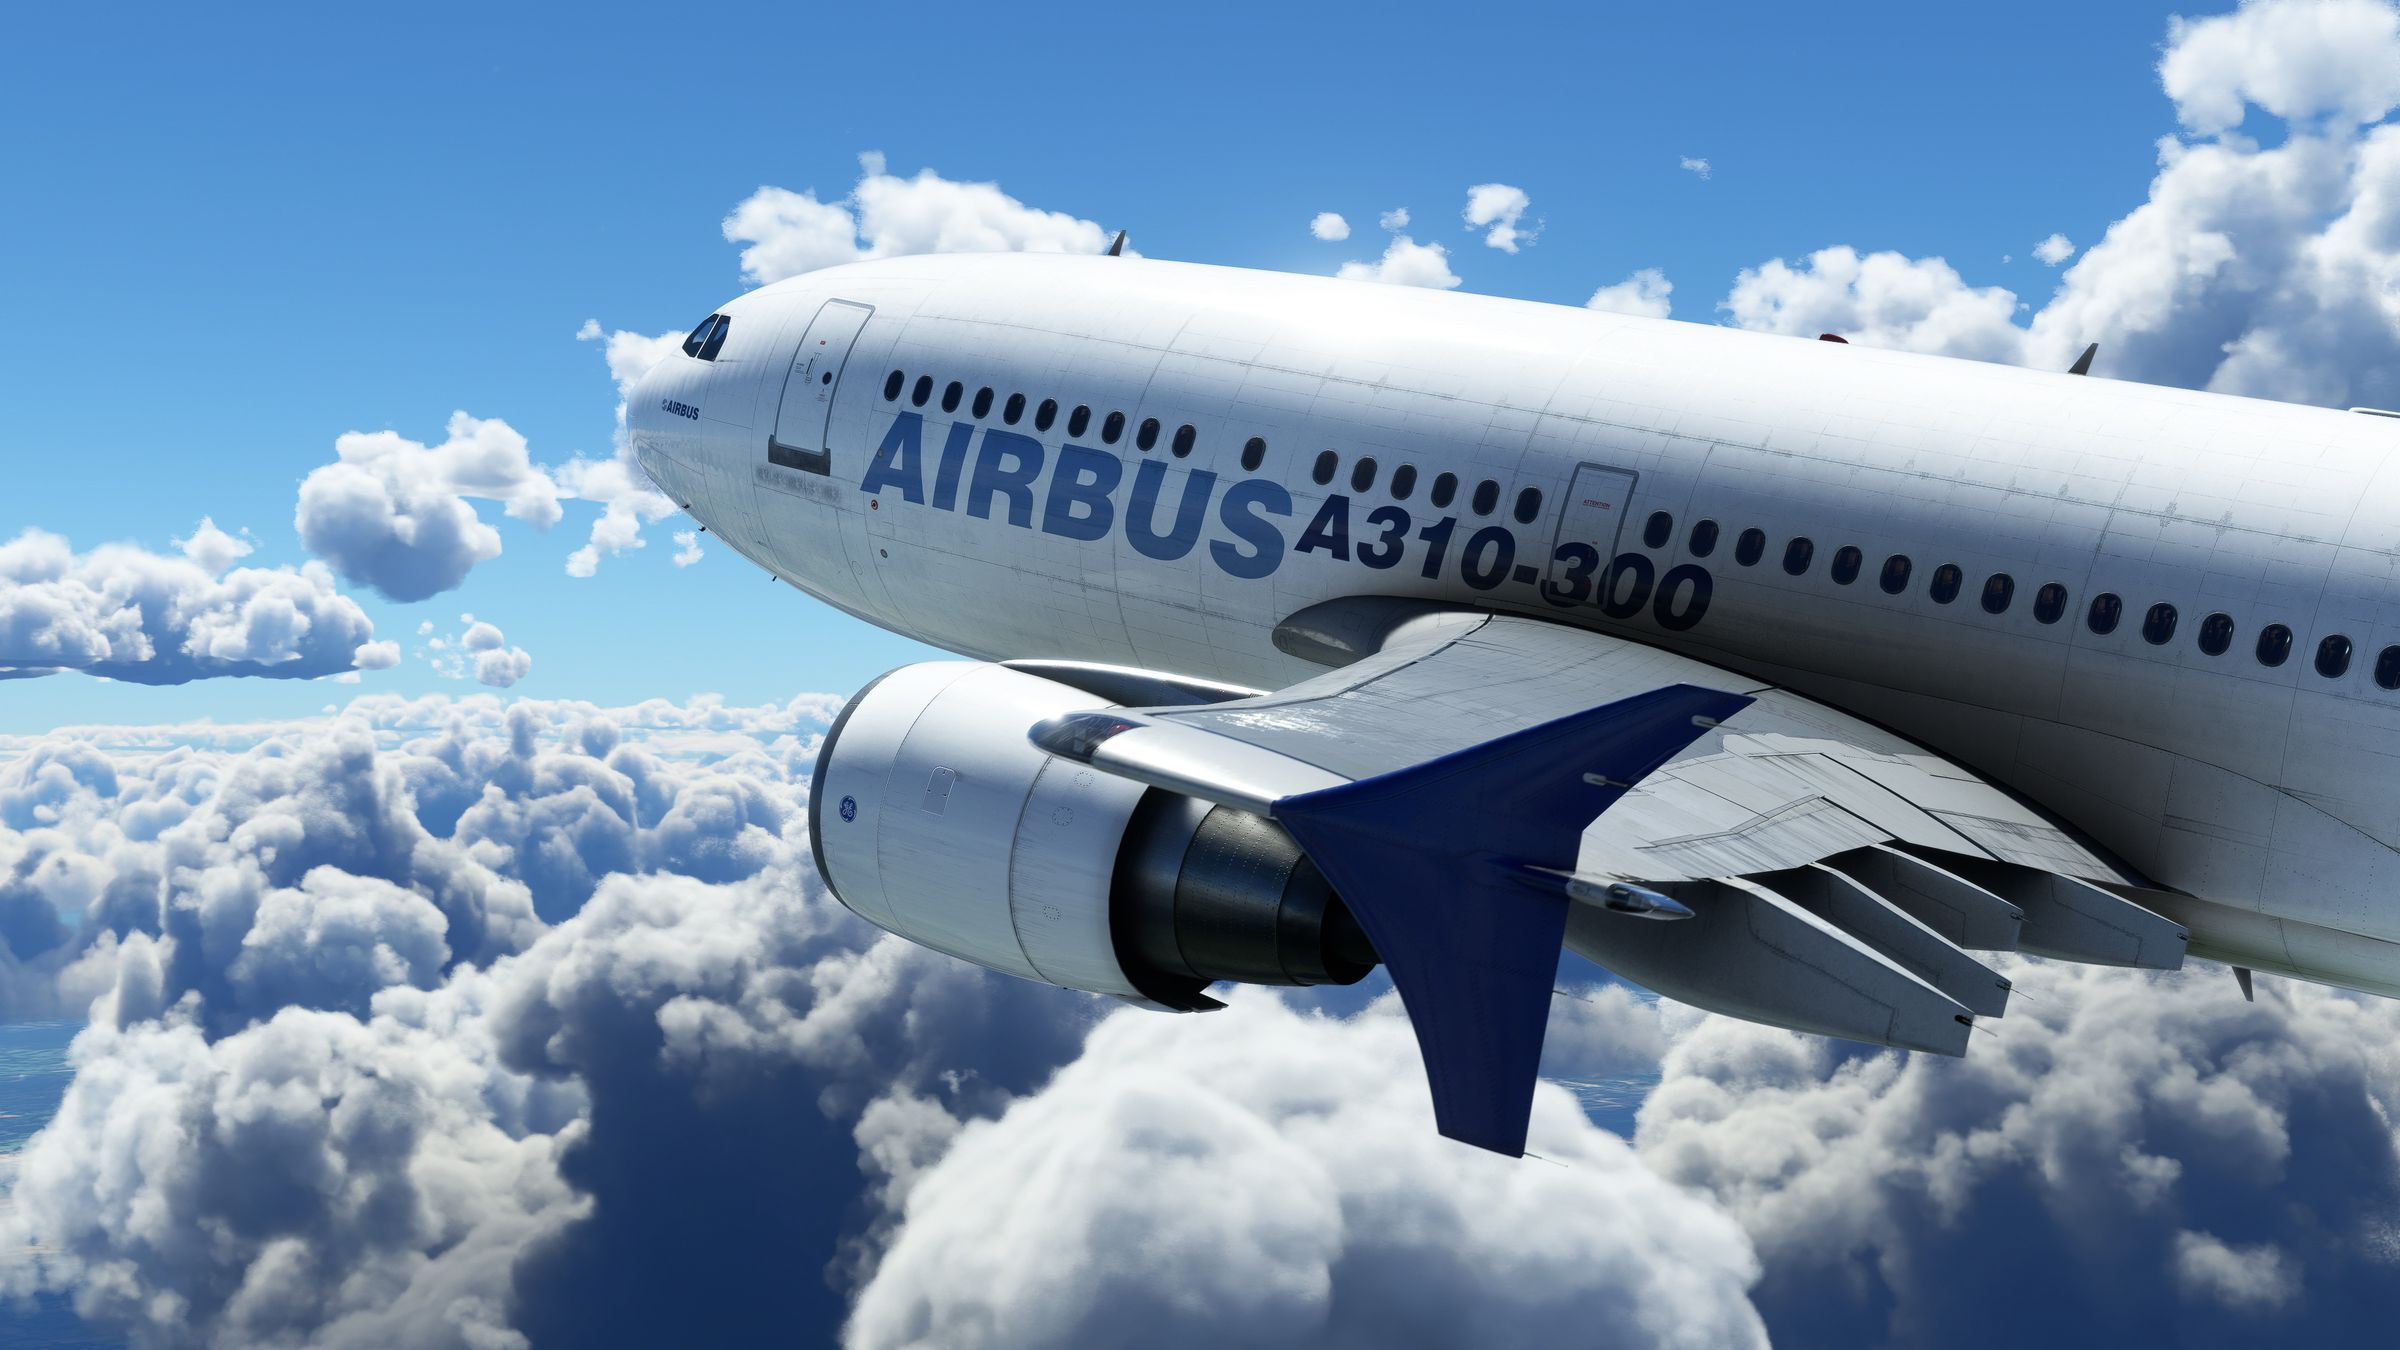 The Airbus A310 has been recreated in Microsoft Flight Simulator.